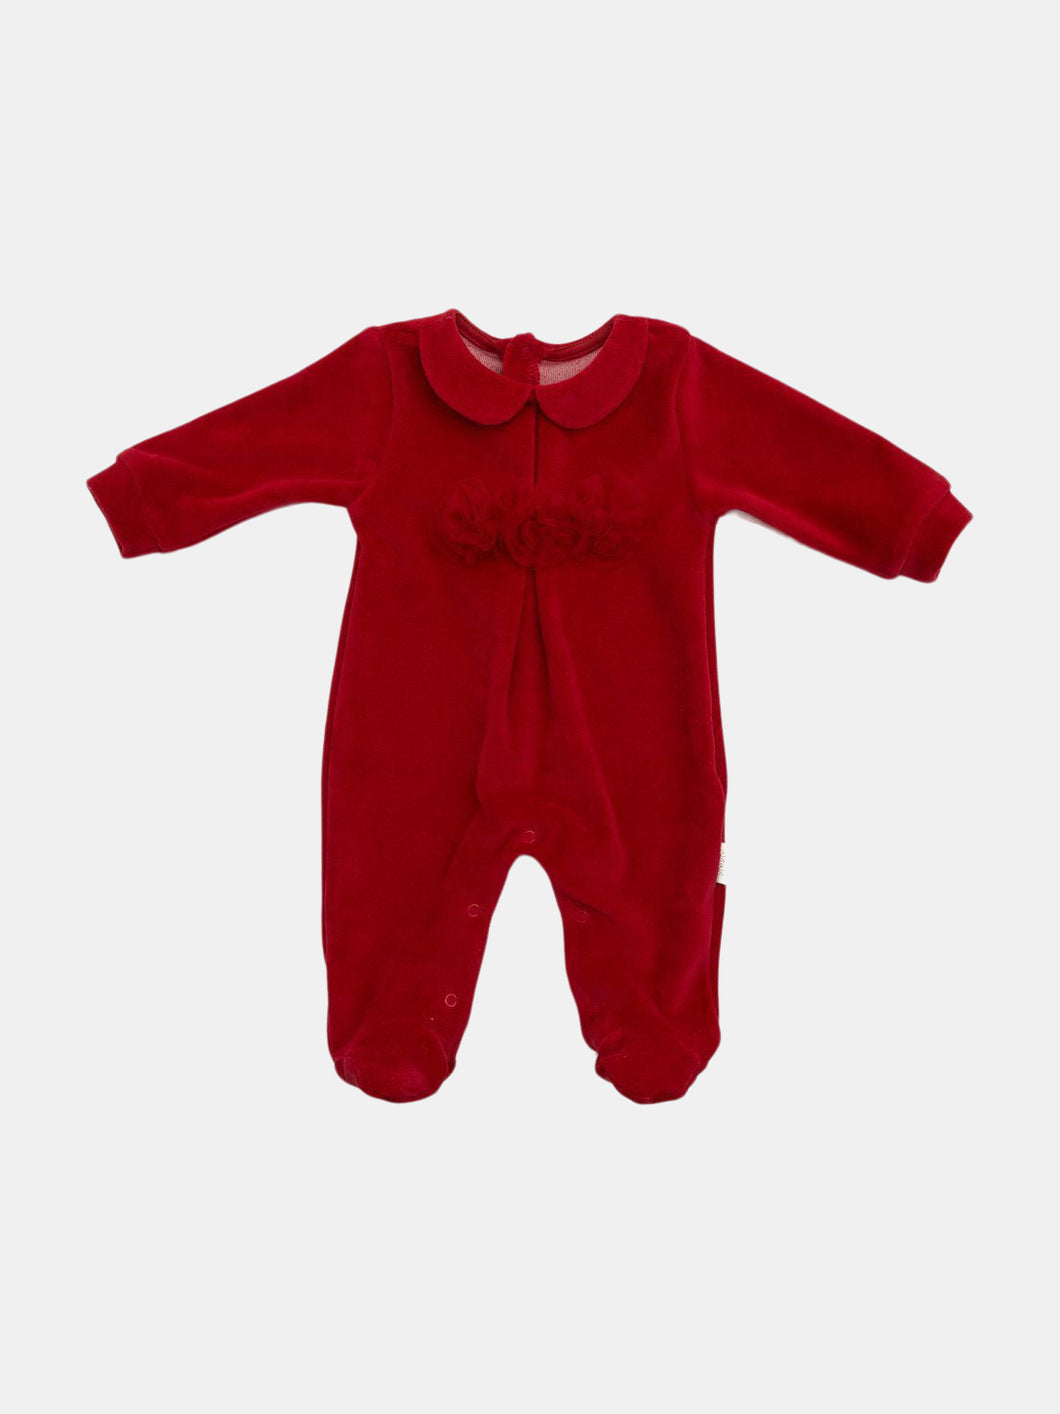 Red New Year Overall Romper